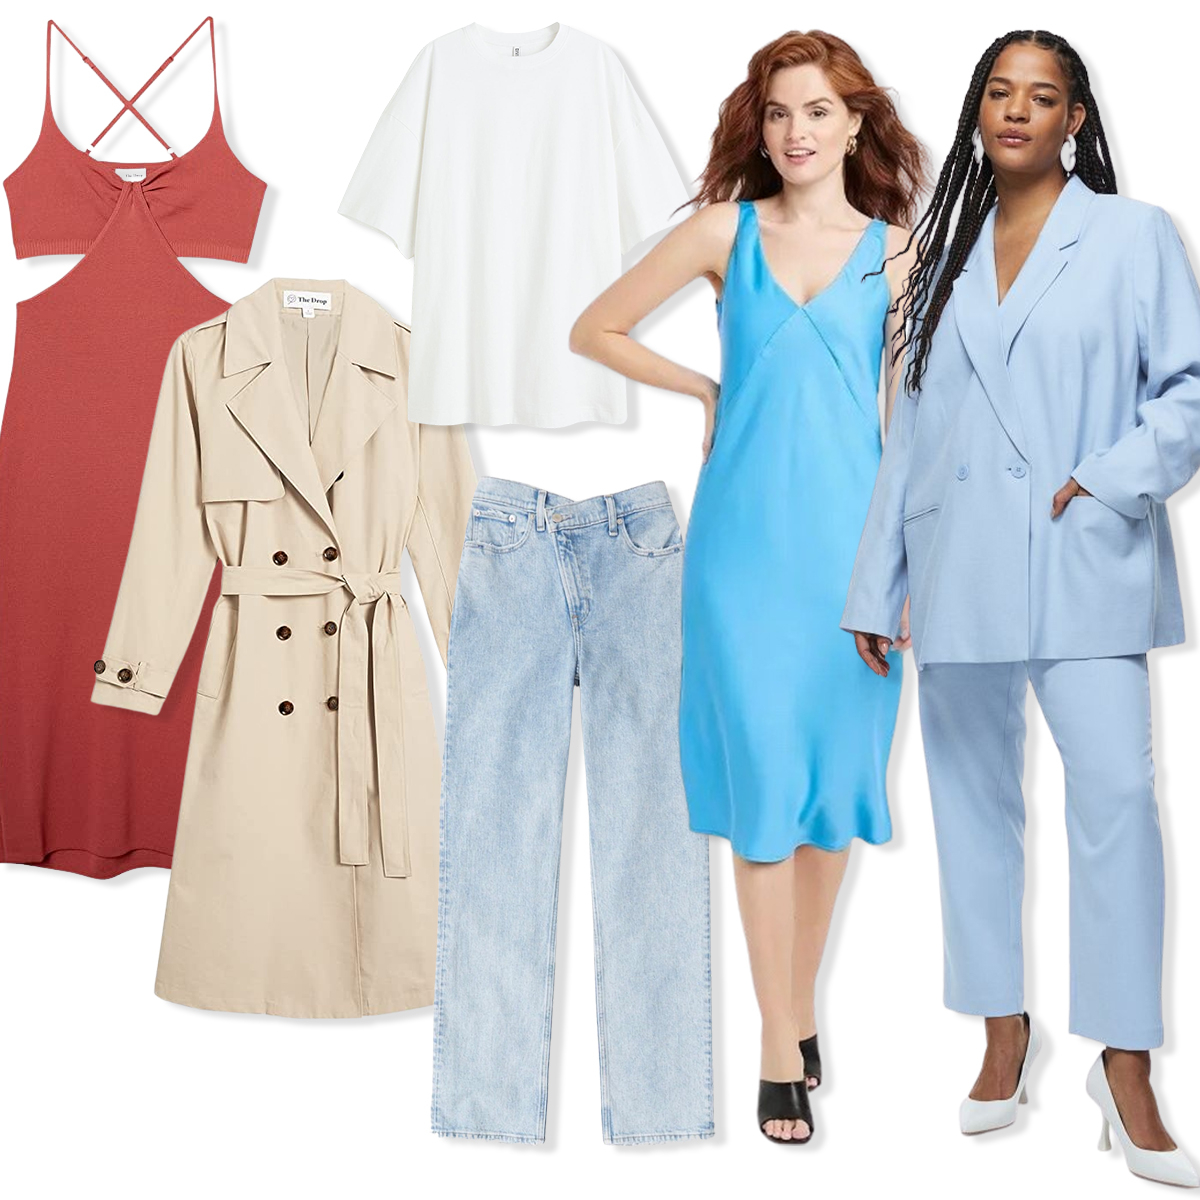 Photo-Worthy Brunch Outfit Ideas to Serve Looks at the Table